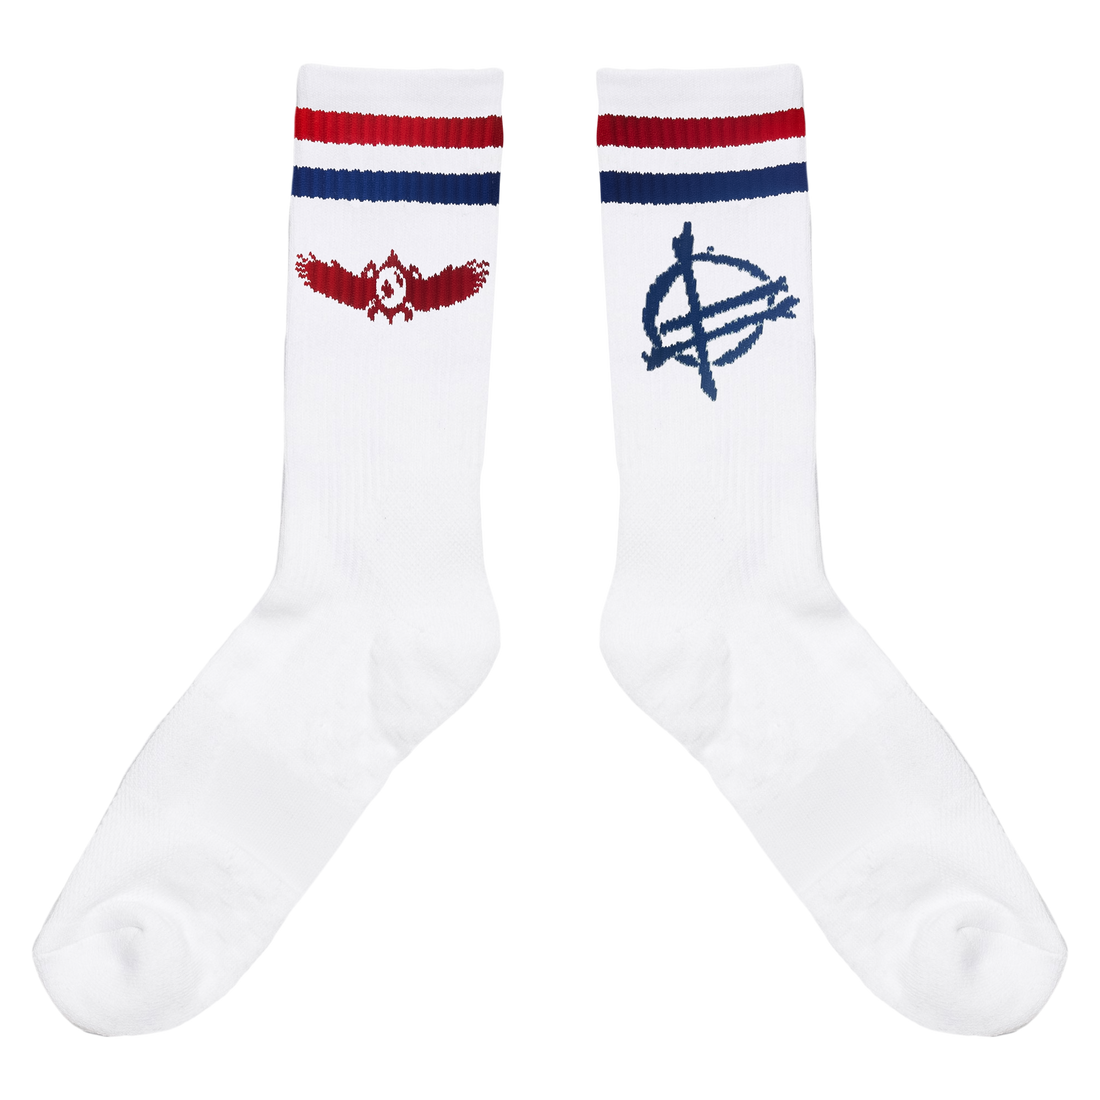 The Halluci Nation x Fucked Up - Here's The Unity Tour Socks